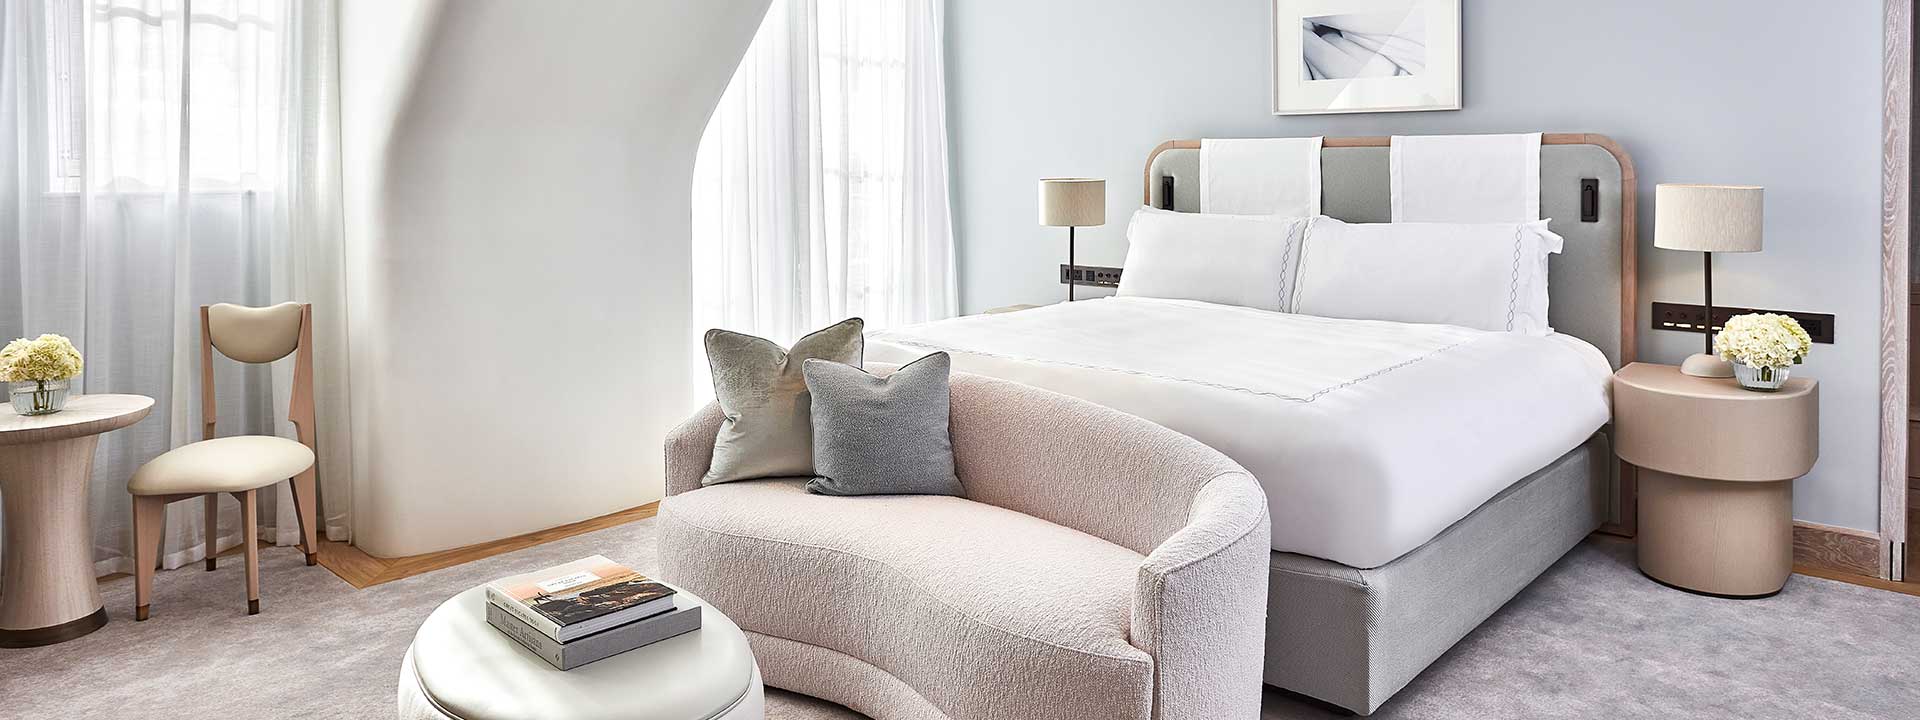 A comfortable bed and sofa in Claridge's Balcony Room, an interior with neutral colour palettes and classic design elements.